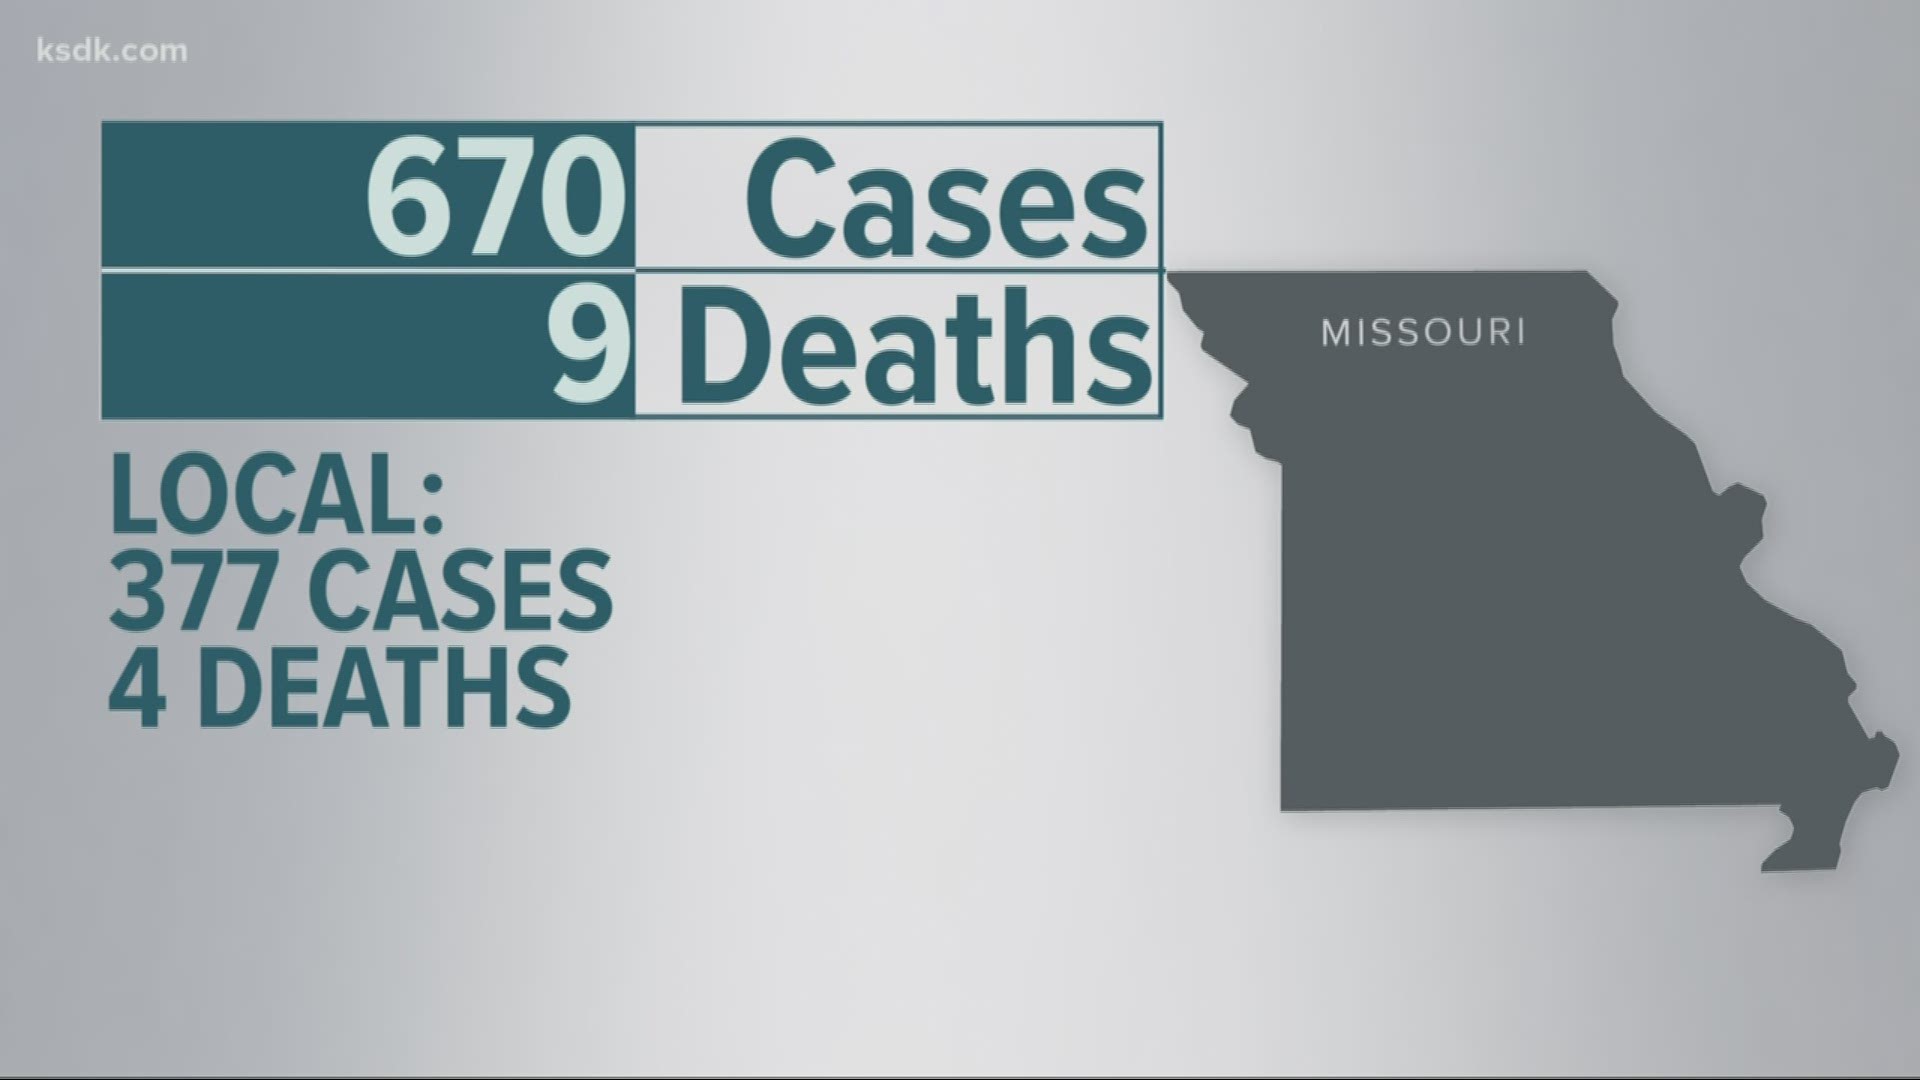 The latest number of positive cases and deaths resulting from COVID-19 in both Missouri in Illinois as of March 27